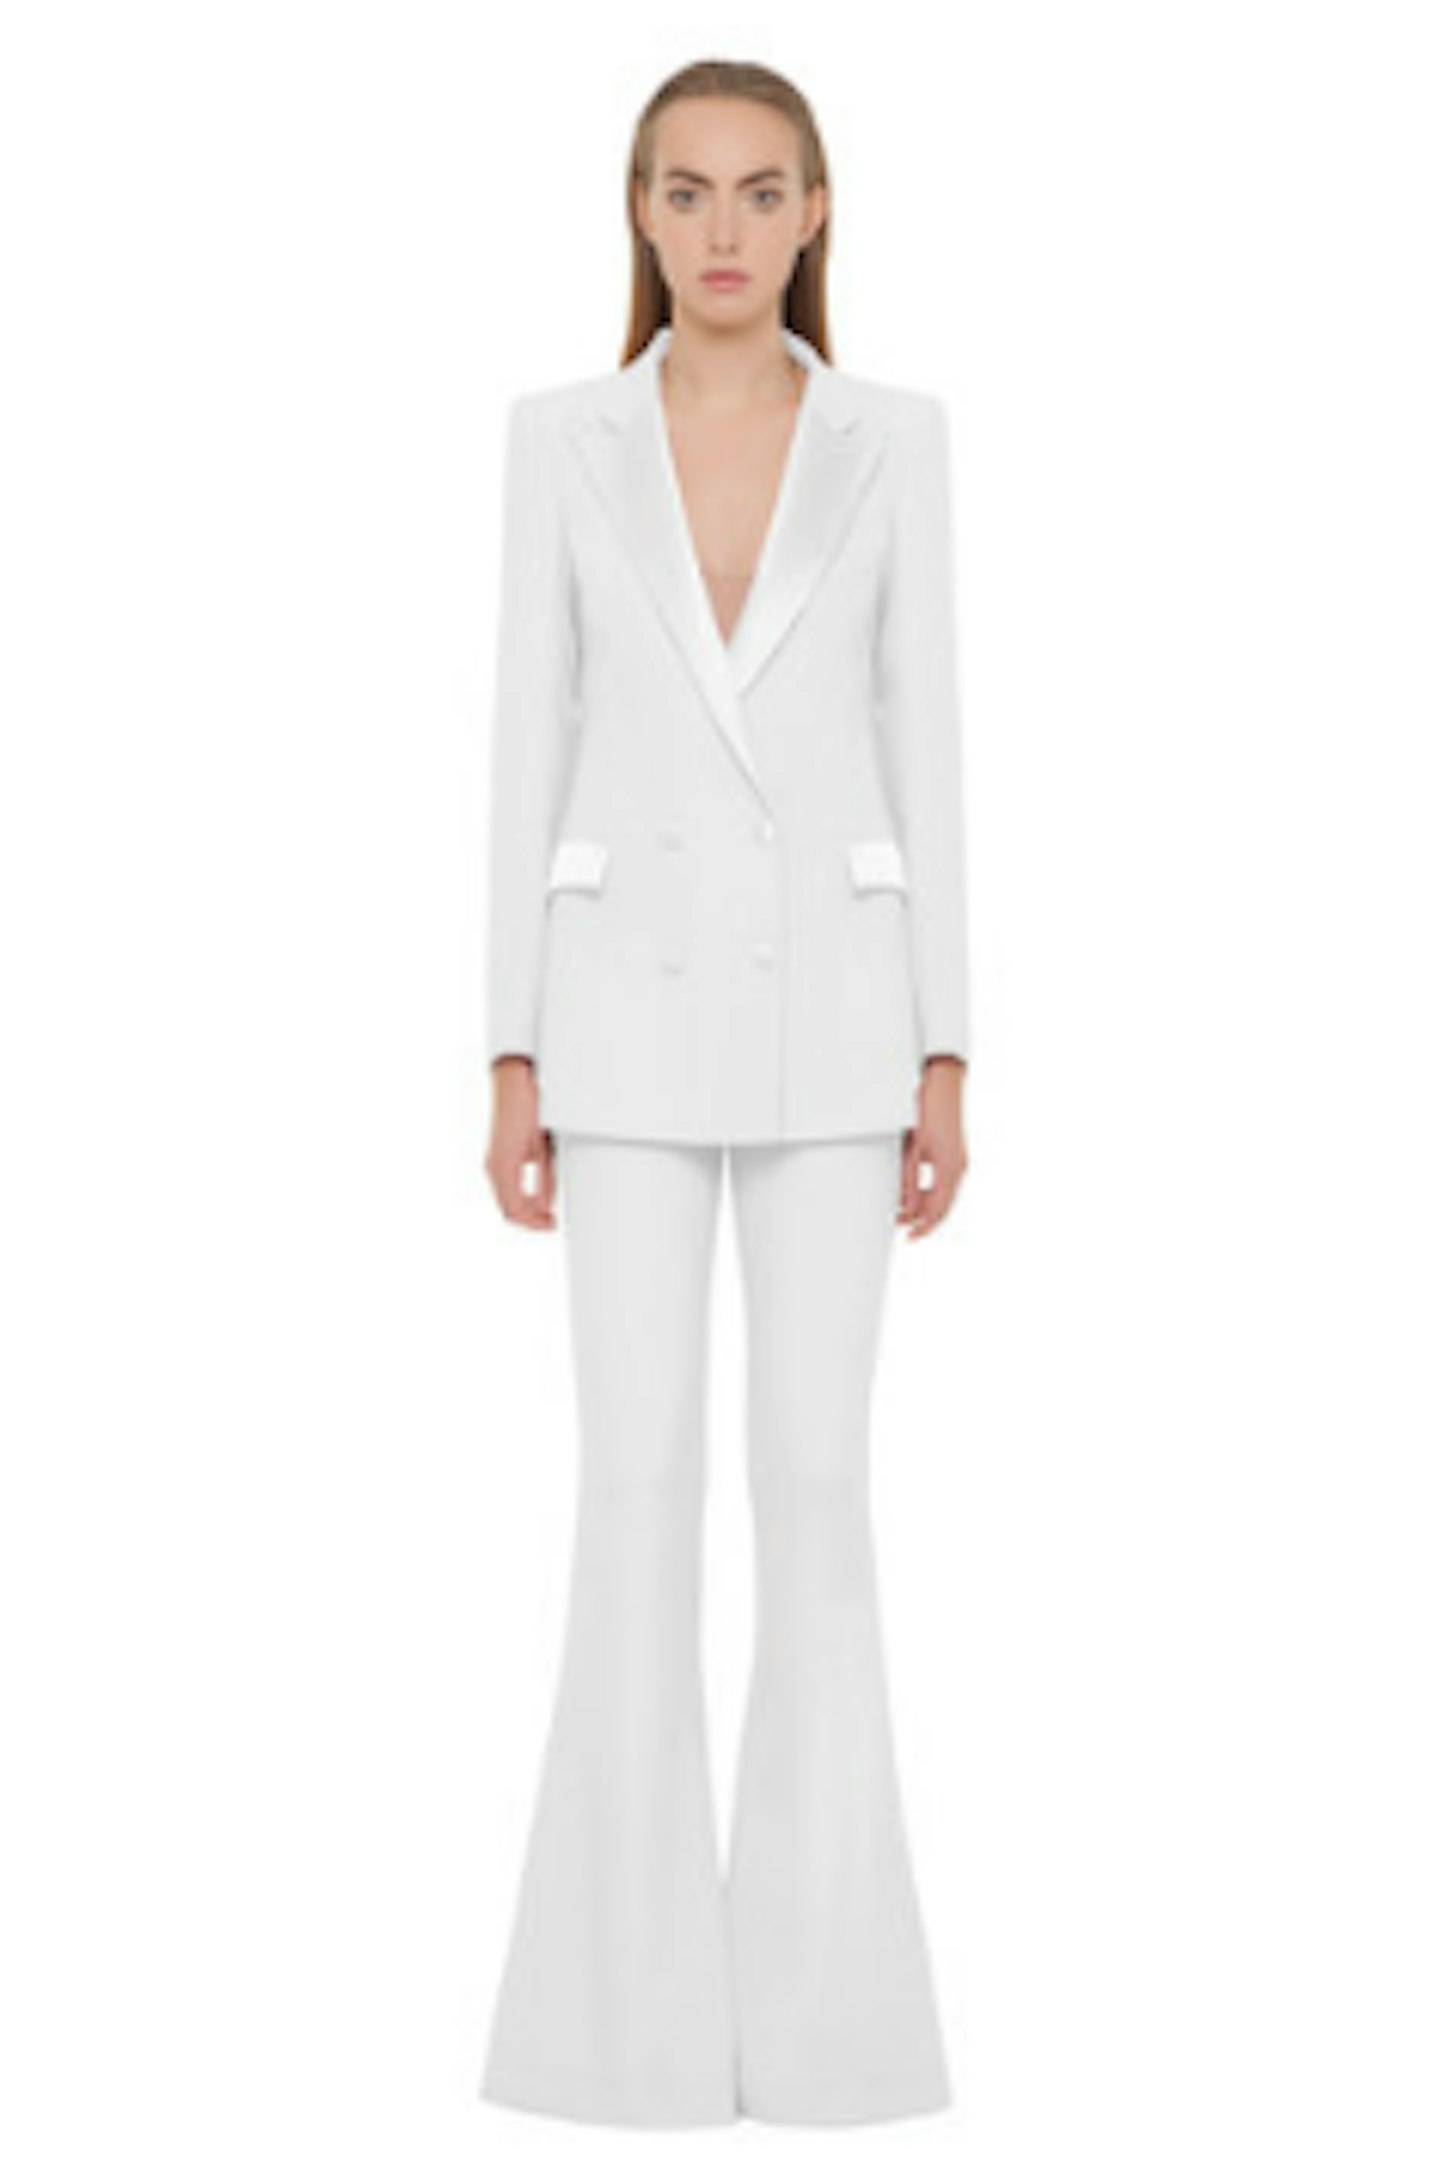 Hebe, The White Bianca Suit, £667